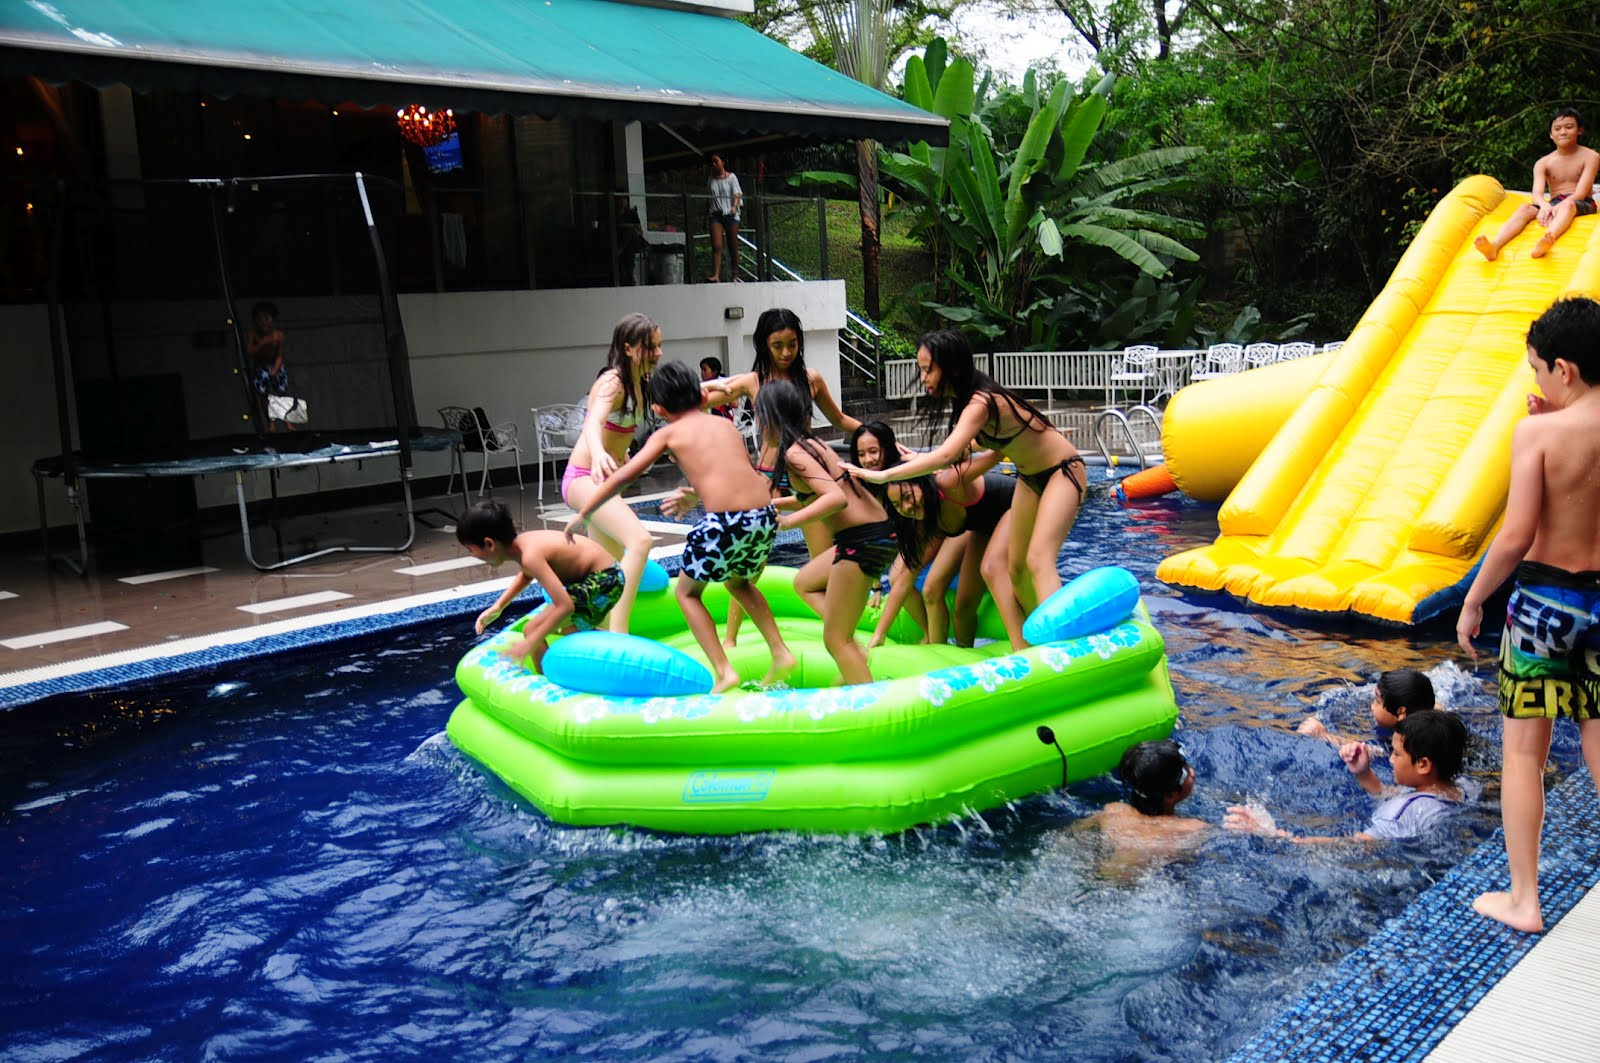 Fun Pool Party Ideas
 Event DirecTus Pool Party FUN for KIDS TEENS & ADULTS